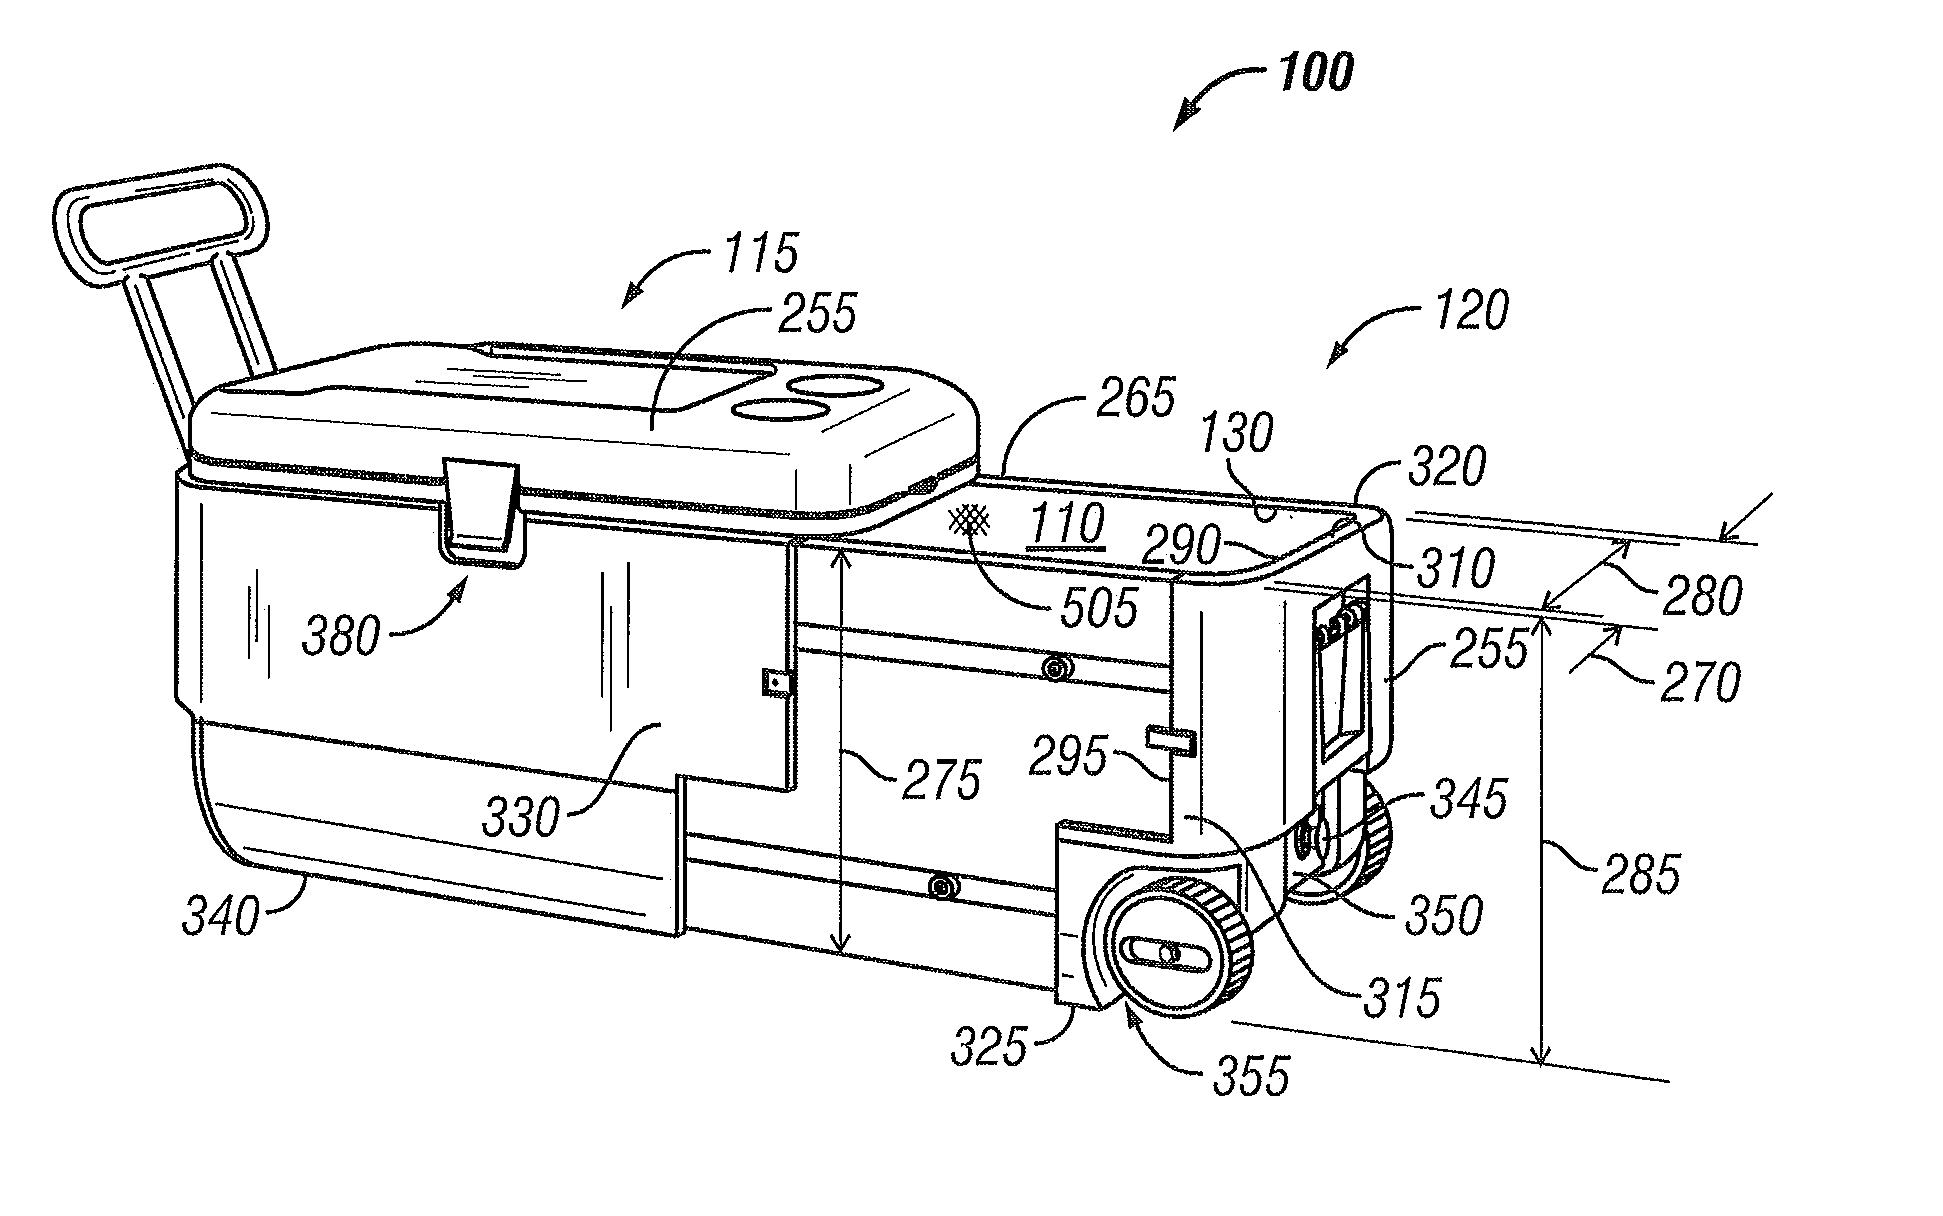 Portable Cooler Having an Extendable Drawer System